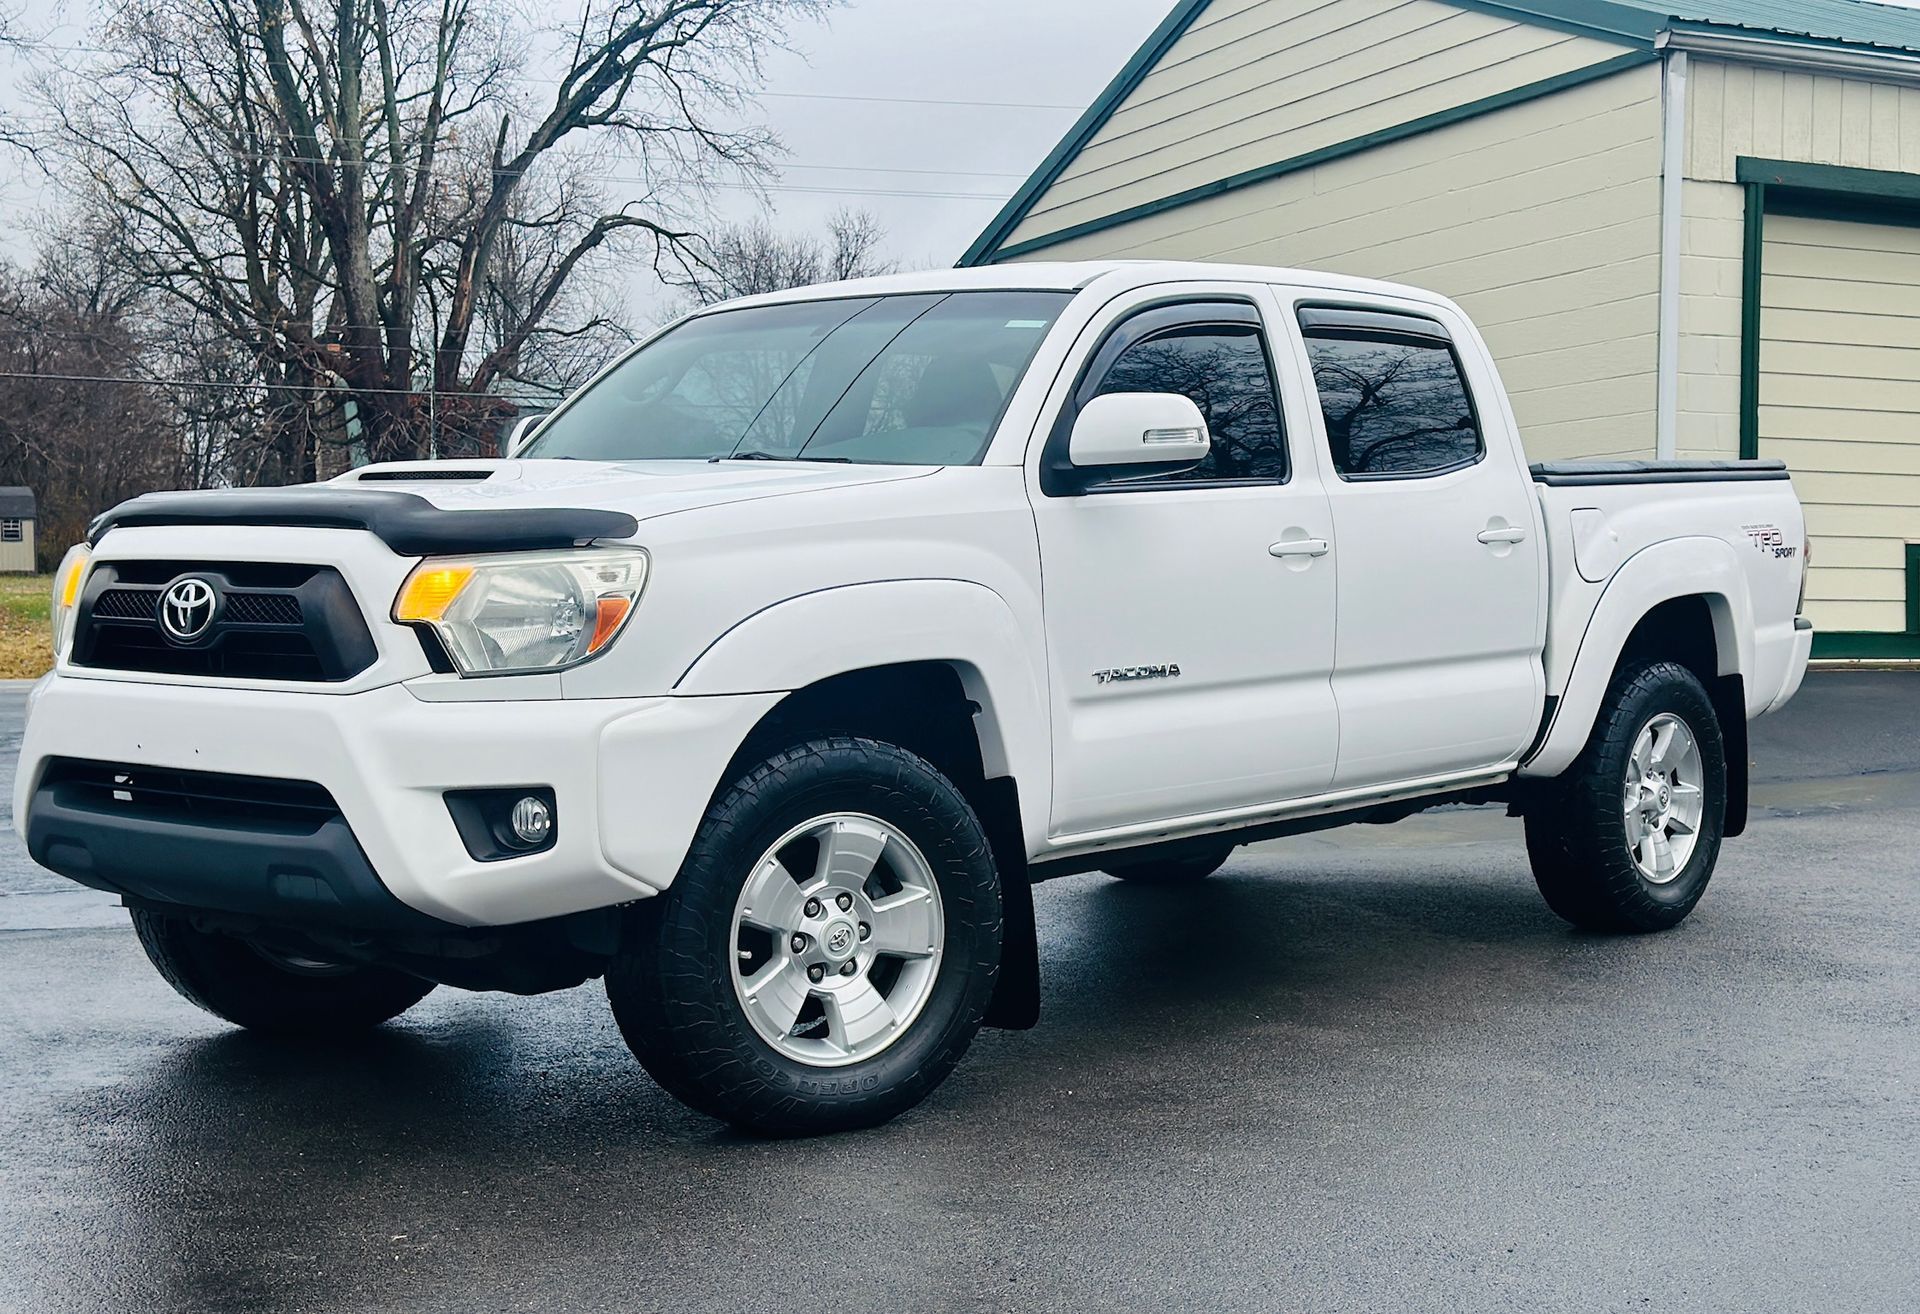 A white toyota tacoma truck is parked in front of a building.